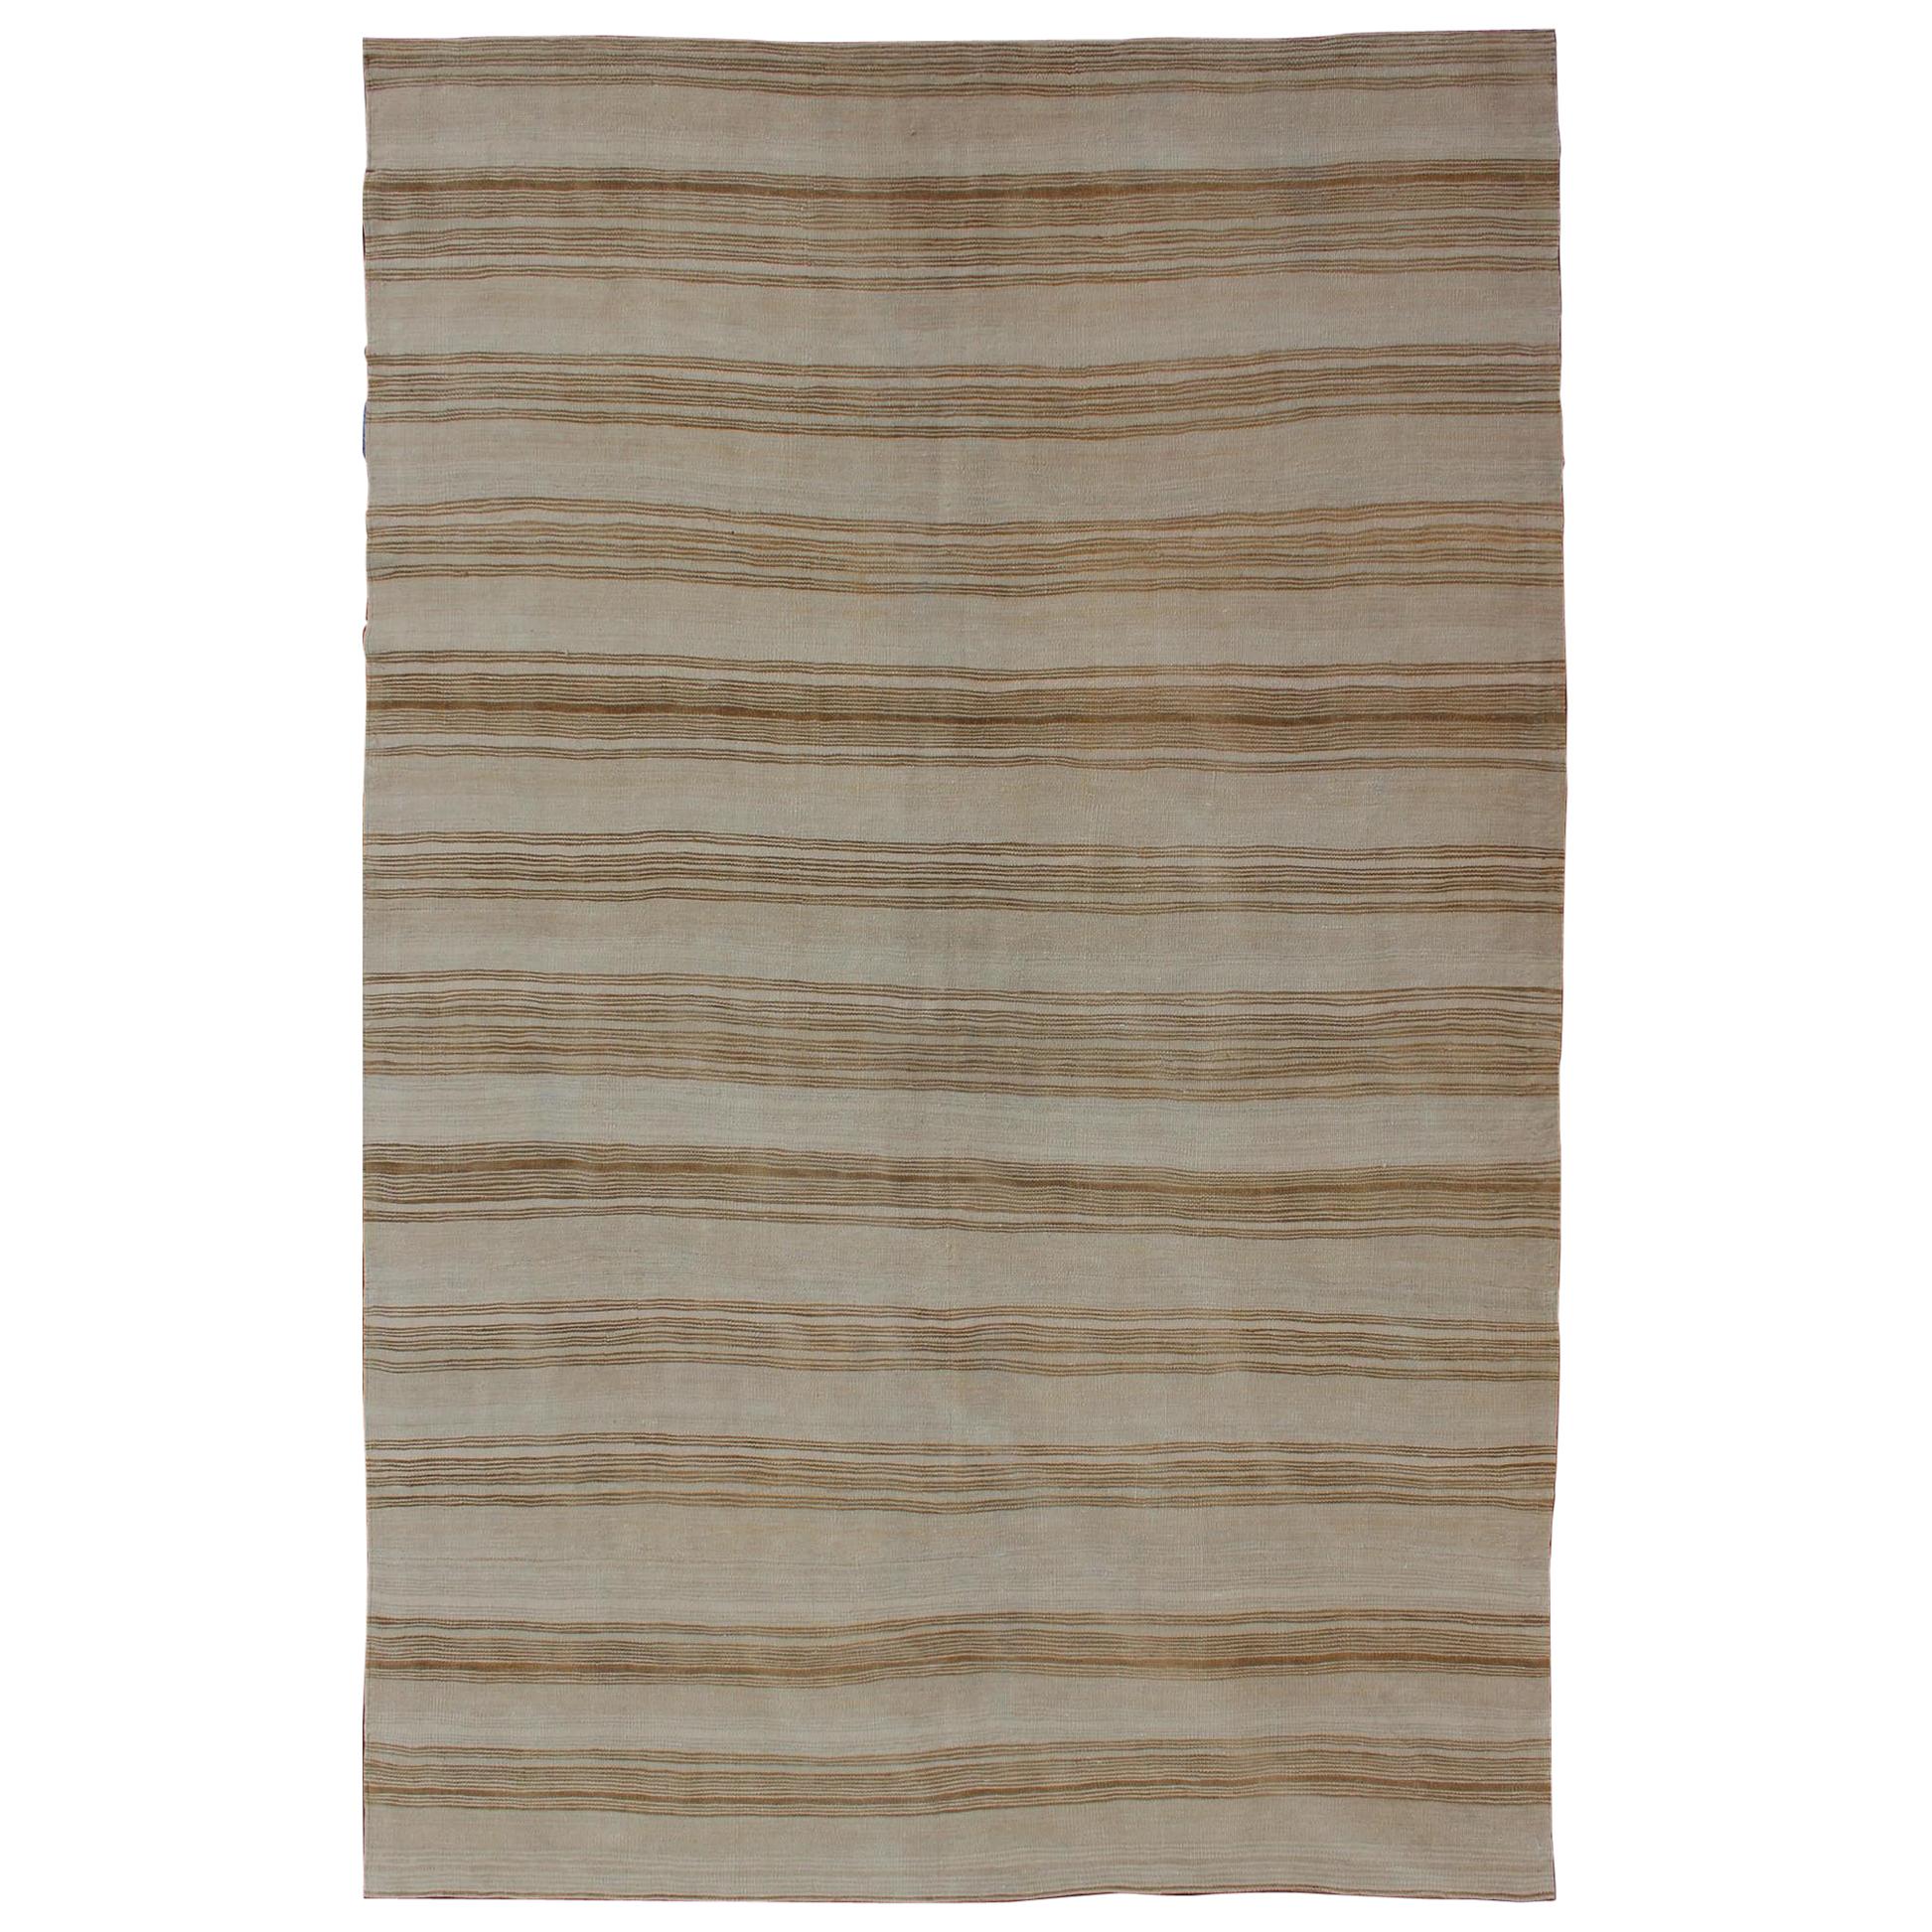 Vintage Turkish Flat-Weave Striped Kilim in Taupe, Brown and Tan Colors For Sale